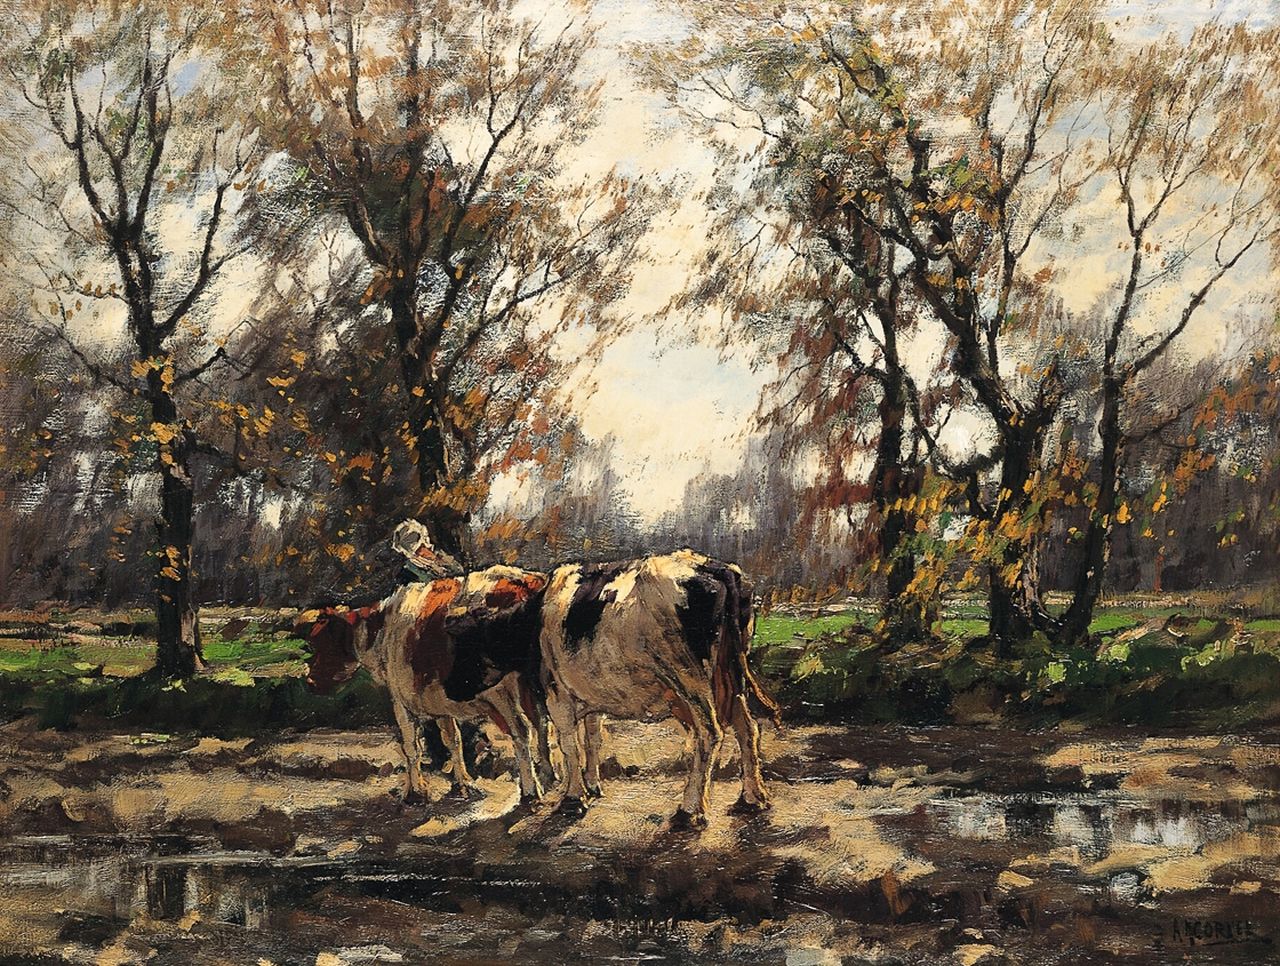 Gorter A.M.  | 'Arnold' Marc Gorter, A milkmaid with her cows after an autumn shower, oil on canvas 75.0 x 100.5 cm, signed l.r.